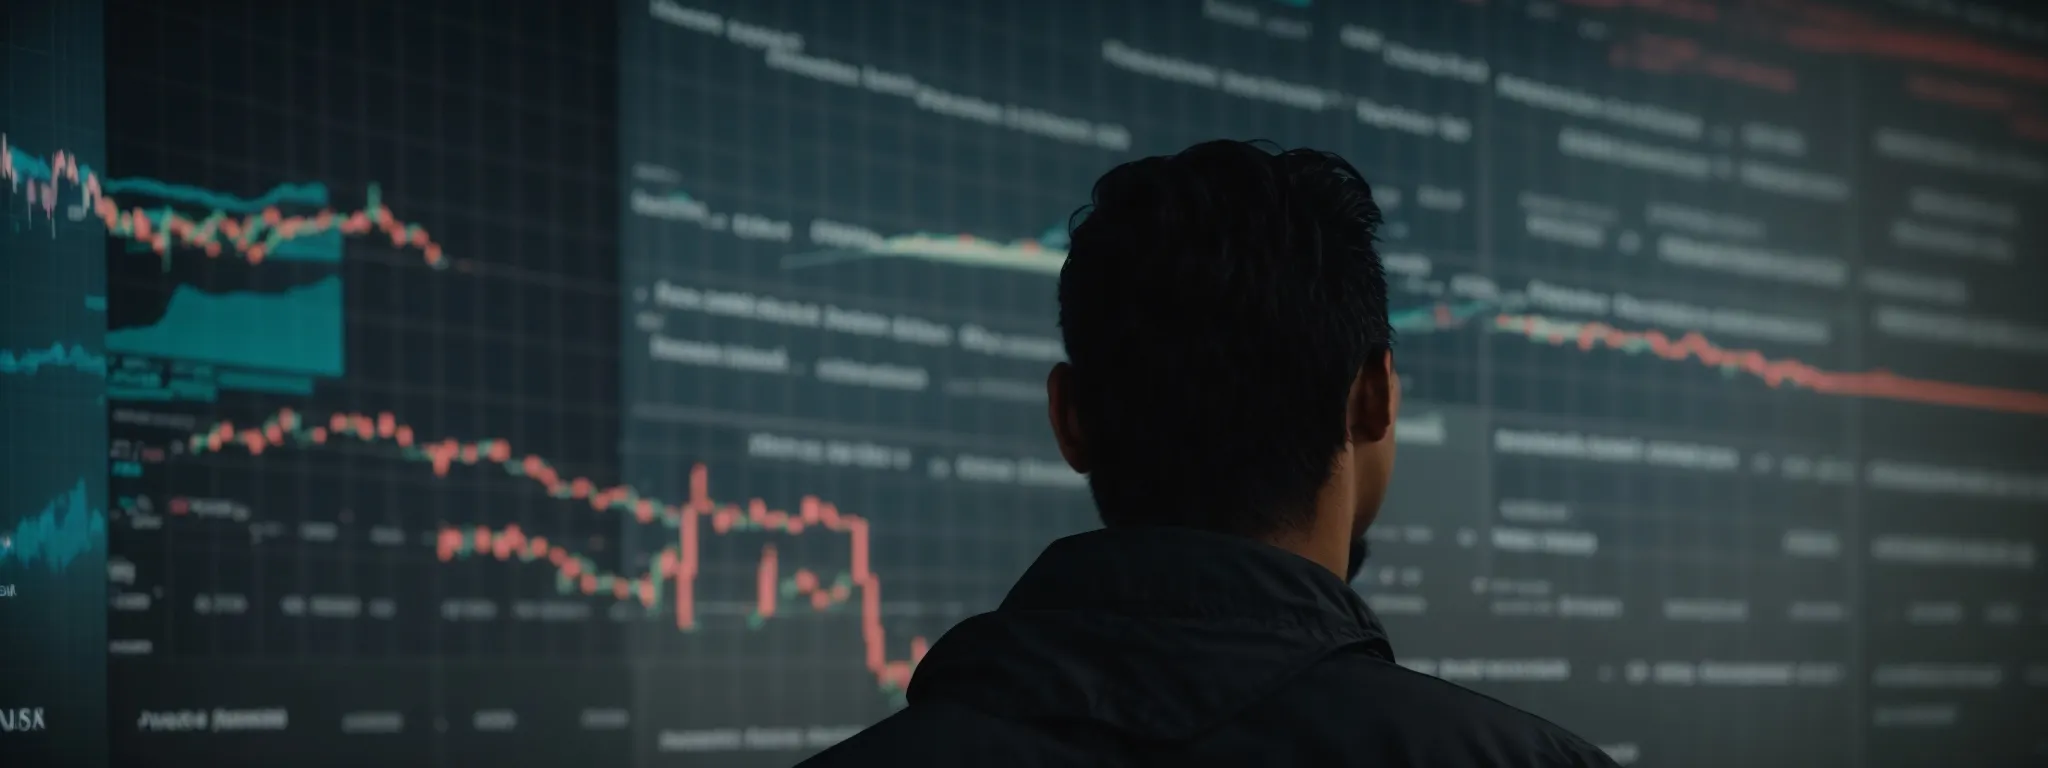 a person contemplating a dynamic graph illustrating market trends and financial projections on a large screen.